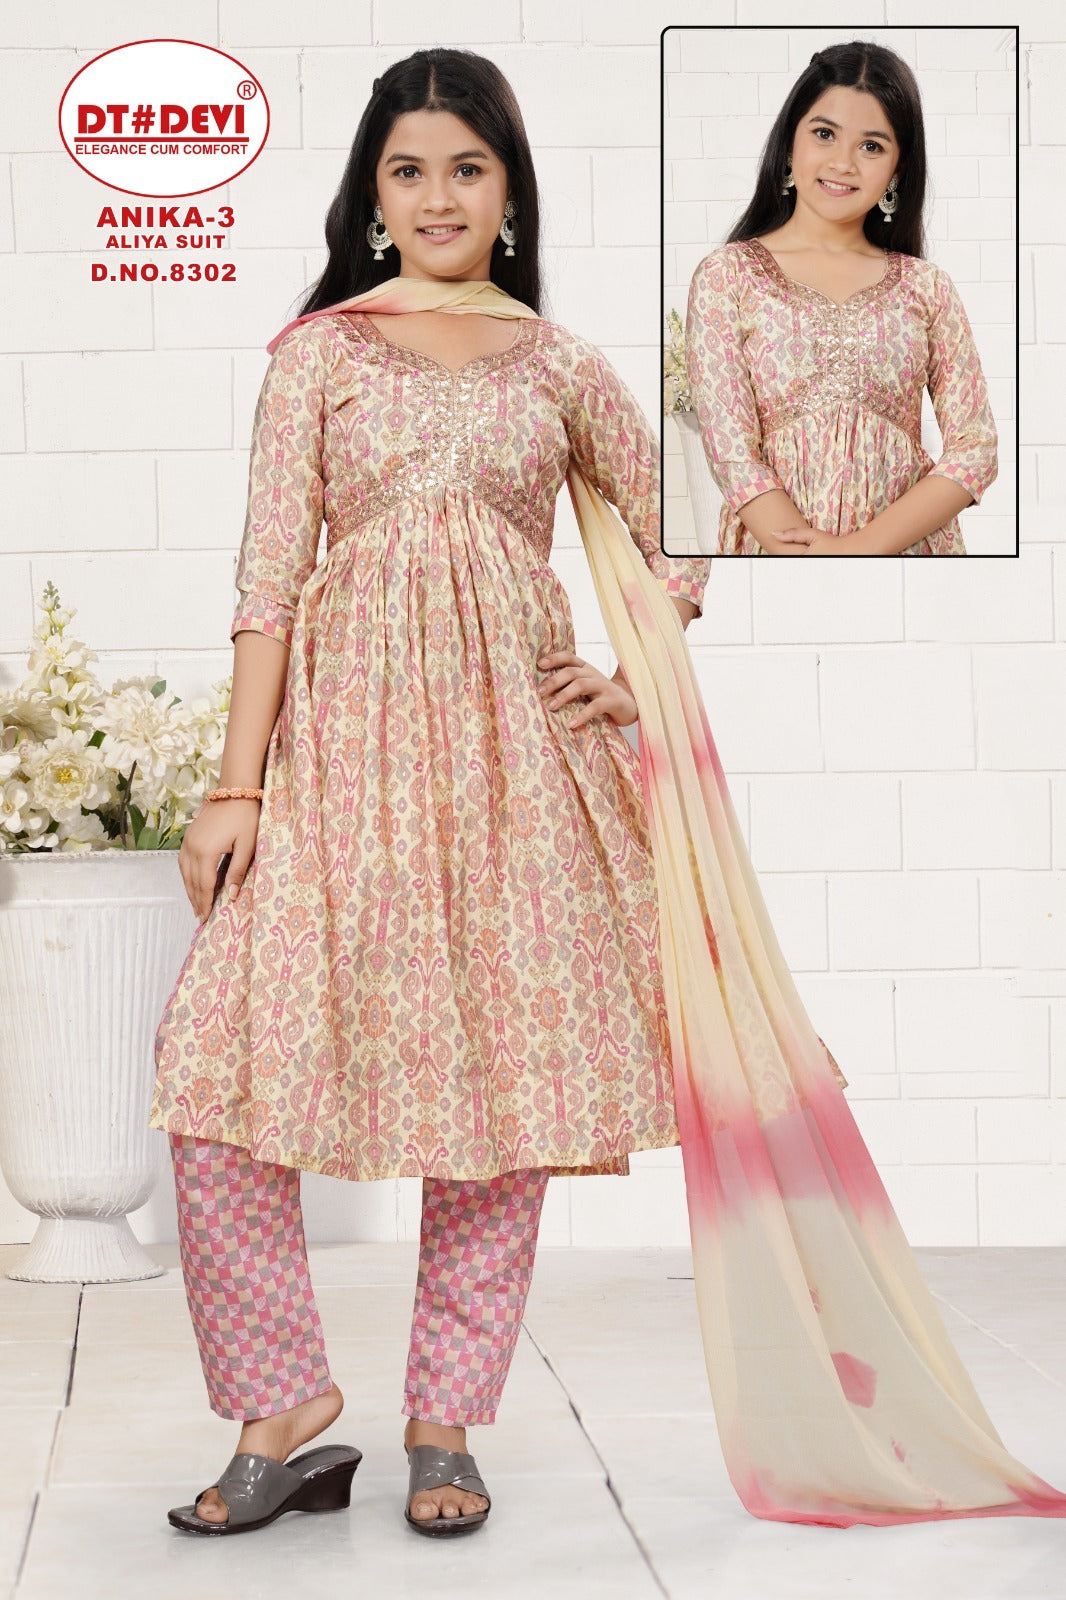 Anika Vol 3-8302 Dt Devi Modal Girls Readymade Pant Suits